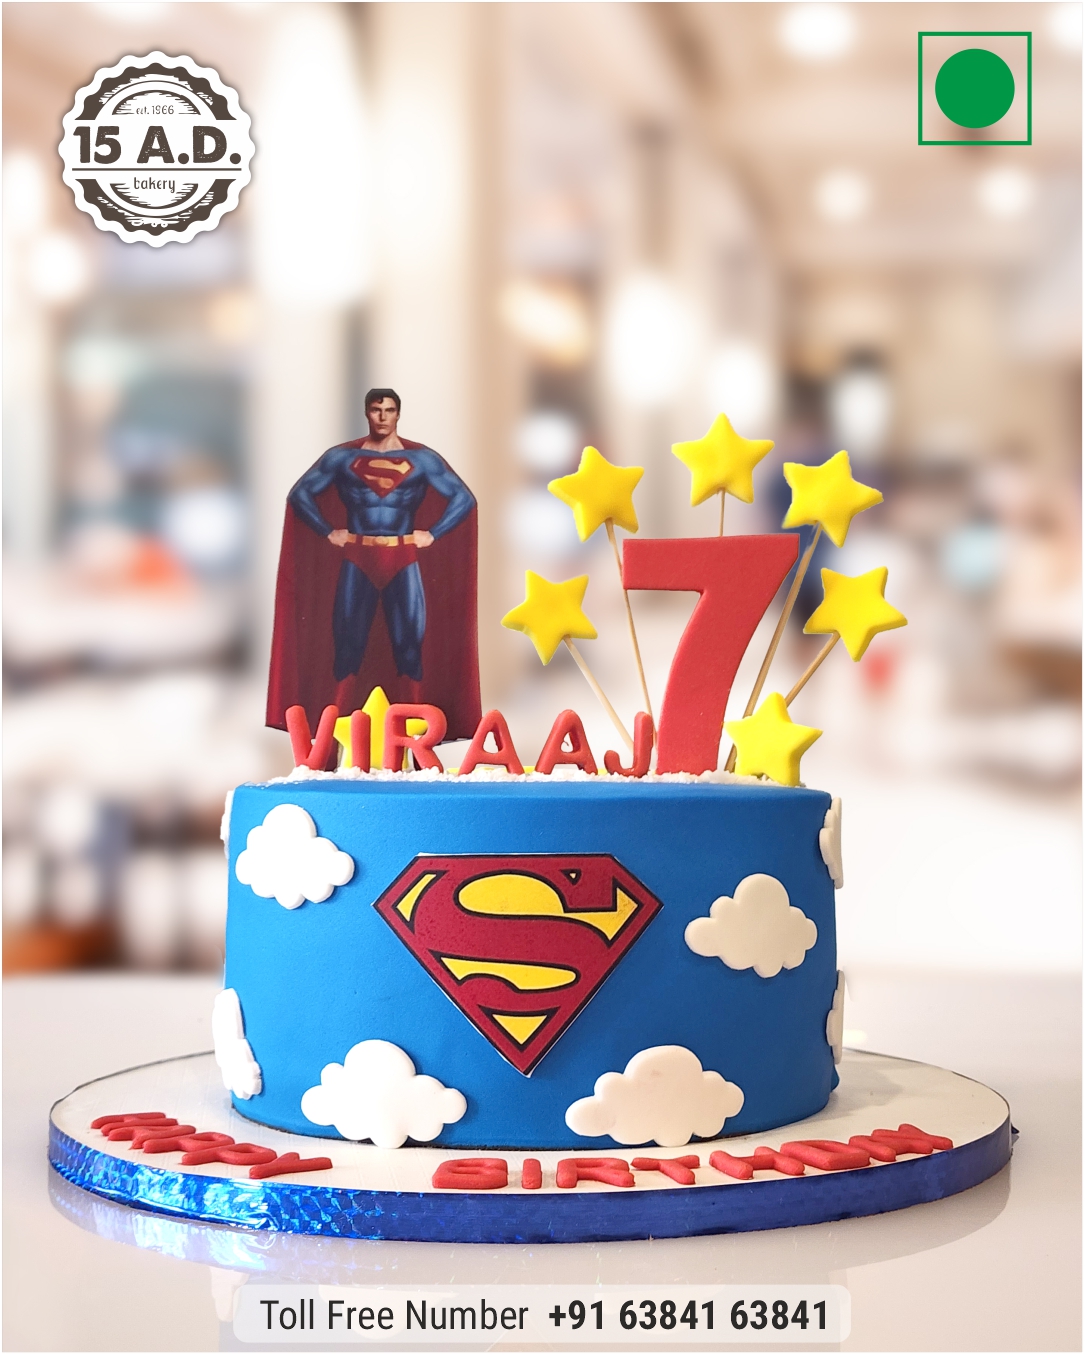 Super Hero Cakes by 15 AD Bakery